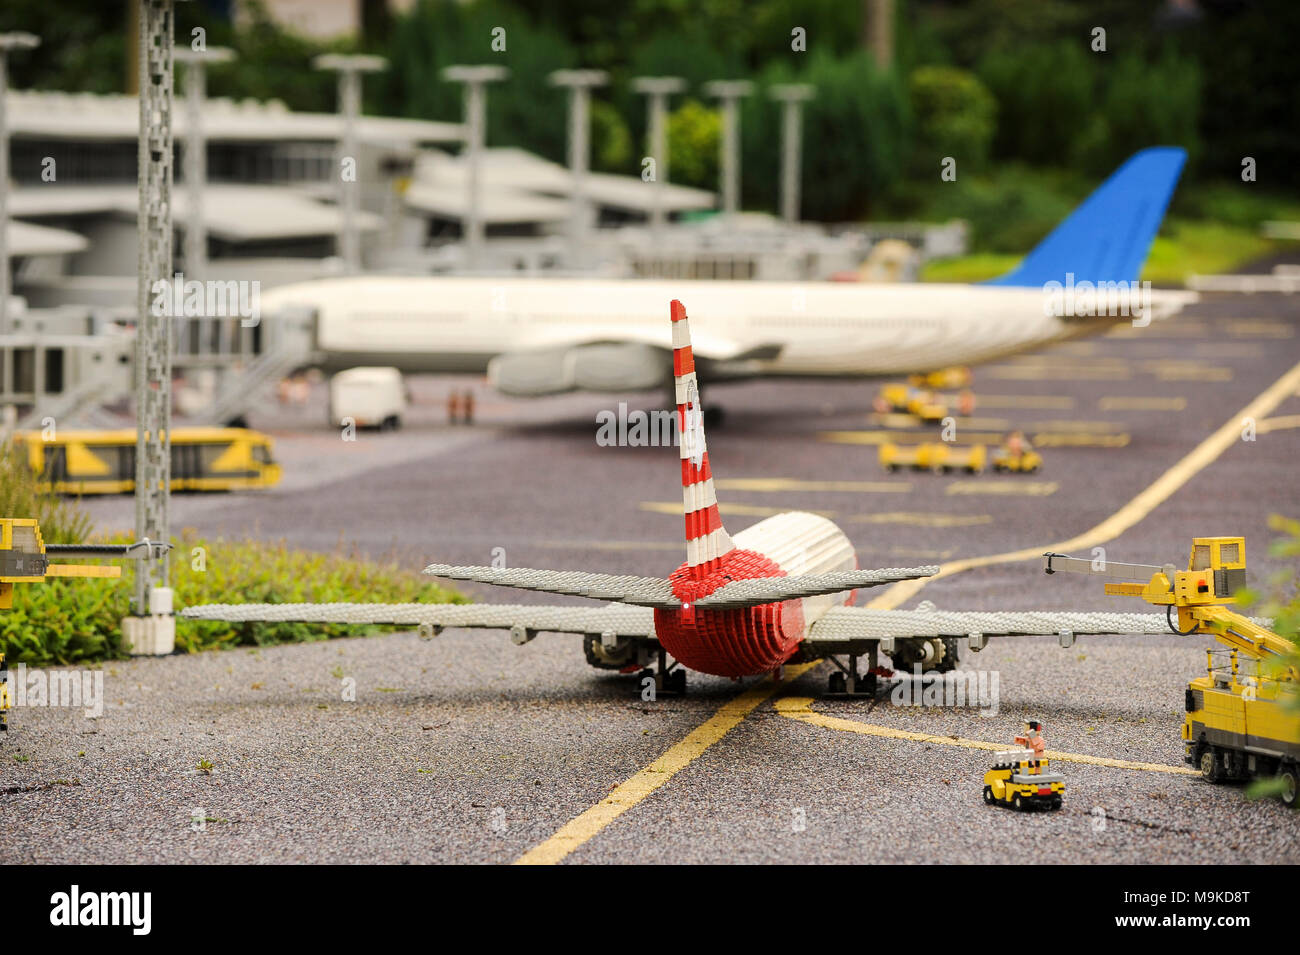 Lego Airport High Resolution Stock Photography and Images - Alamy